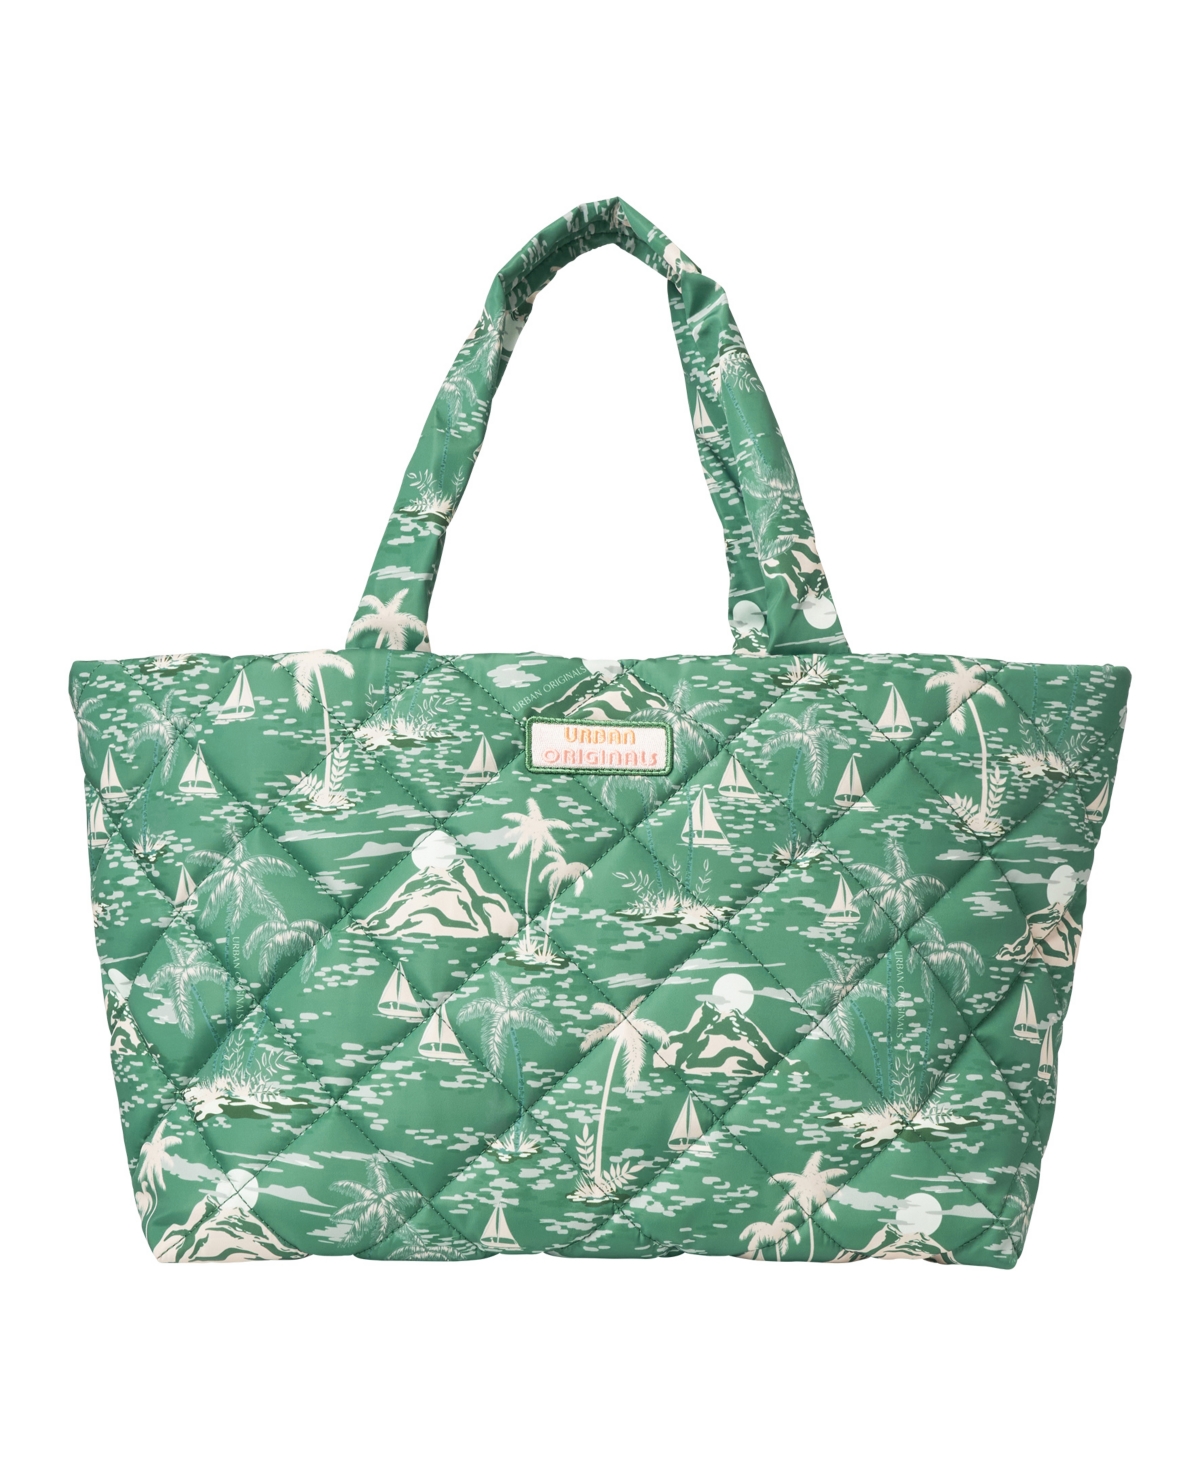 Urban Originals Tropical Extra Large Tote Bag In Island Green